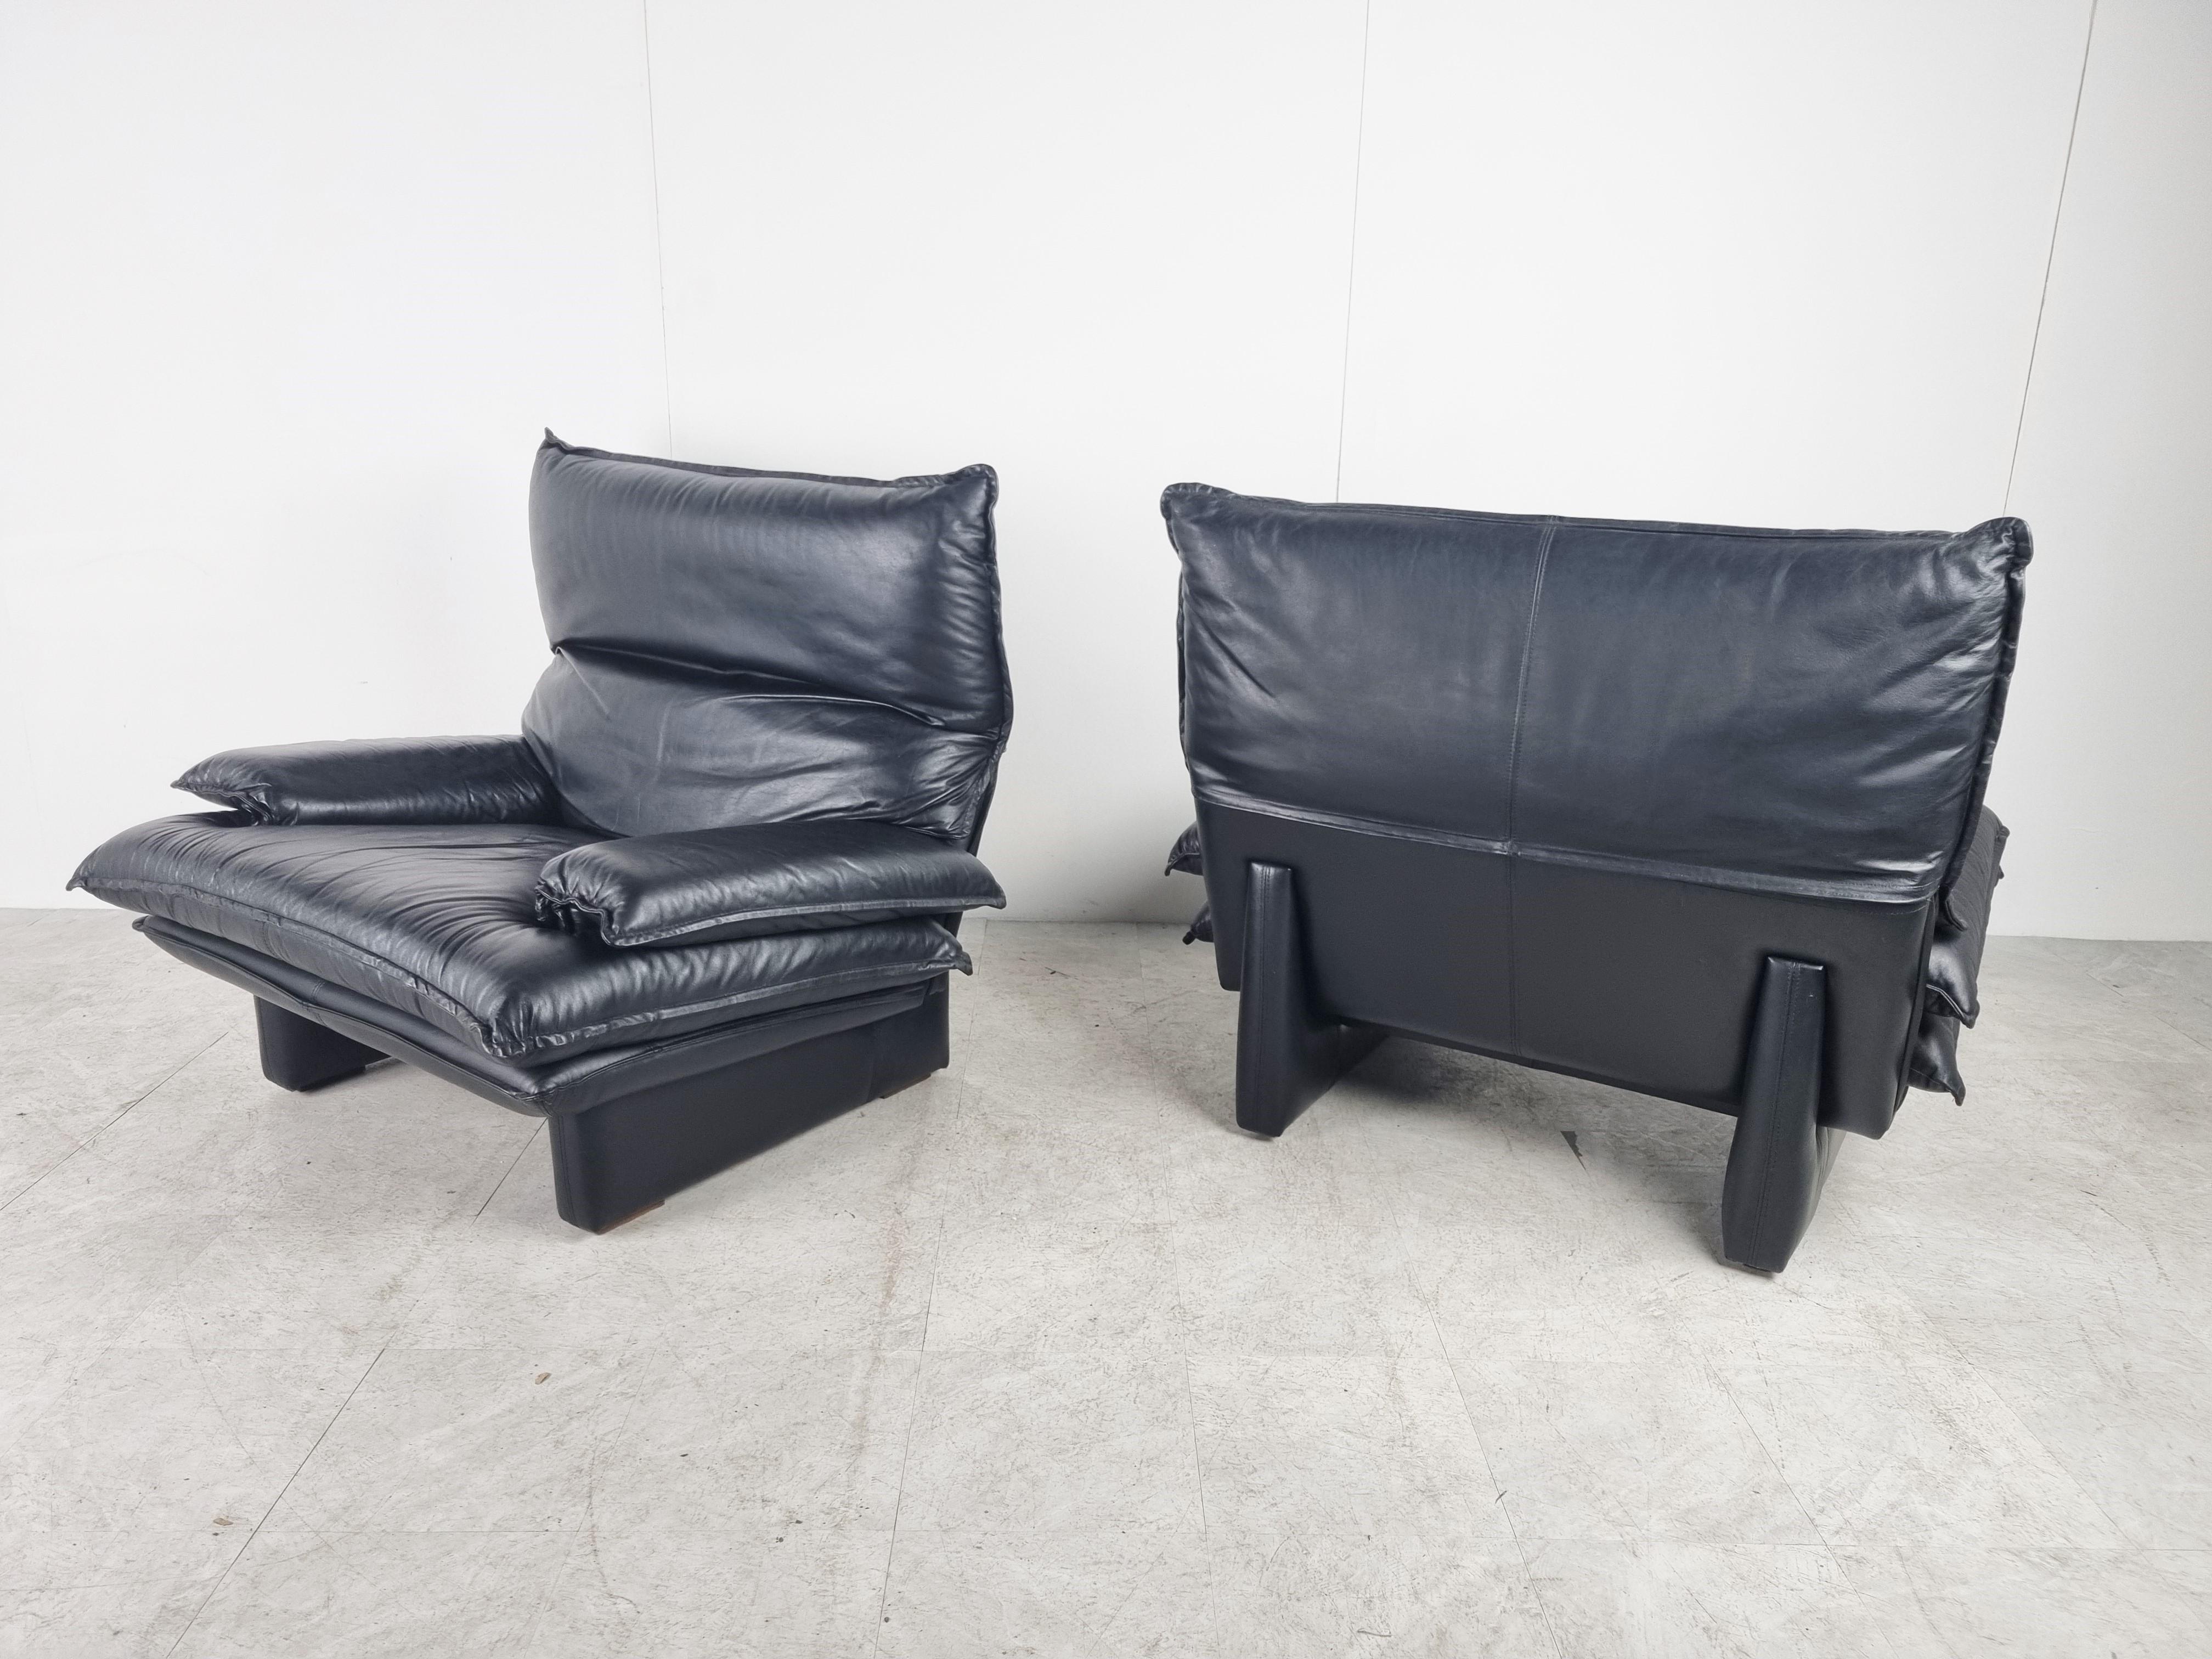 Pair of very comfortable black leather armchairs from Italy.

The headrest is adjustable.

Tthe chairs are very comfortable thanks to the thick leather cushions.

The armchairs seems to be very much inspred by the maralunga sofas from Vico